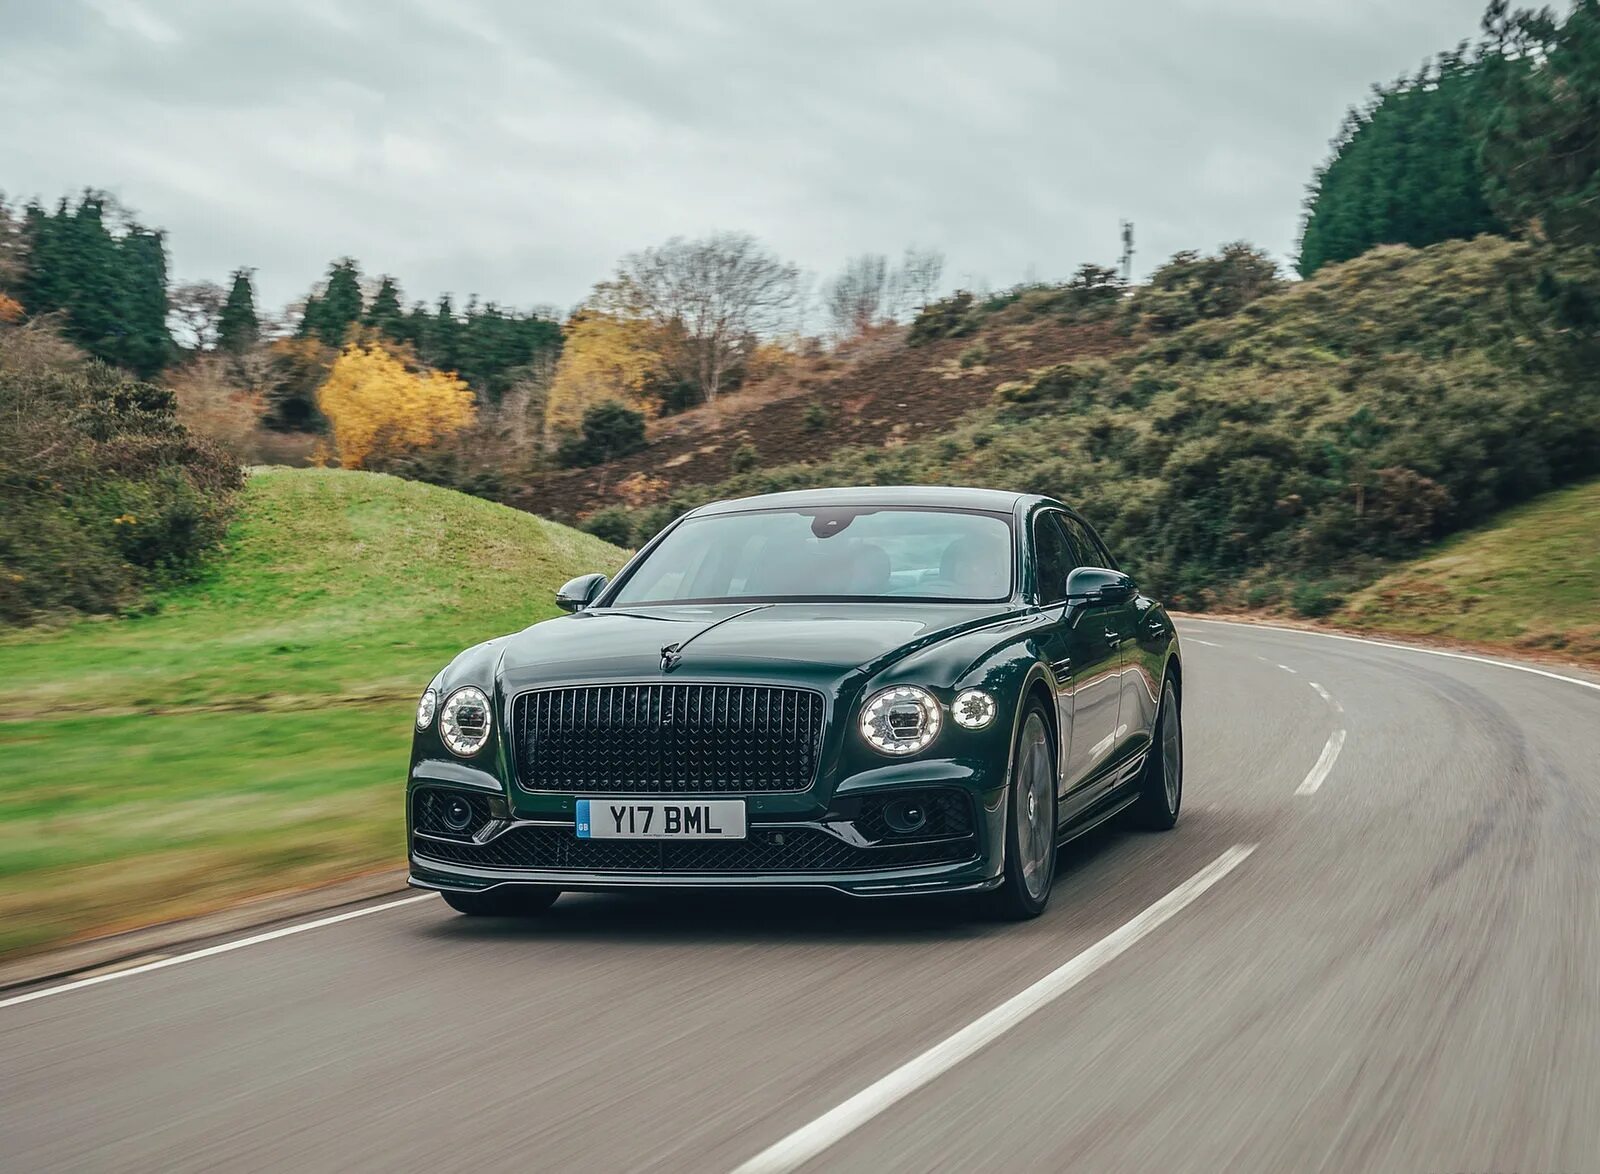 Bentley Flying Spur 2021. Бентли Flying Spur 2021. Bentley Flying Spur v8. Бентли Flying Spur 2022.